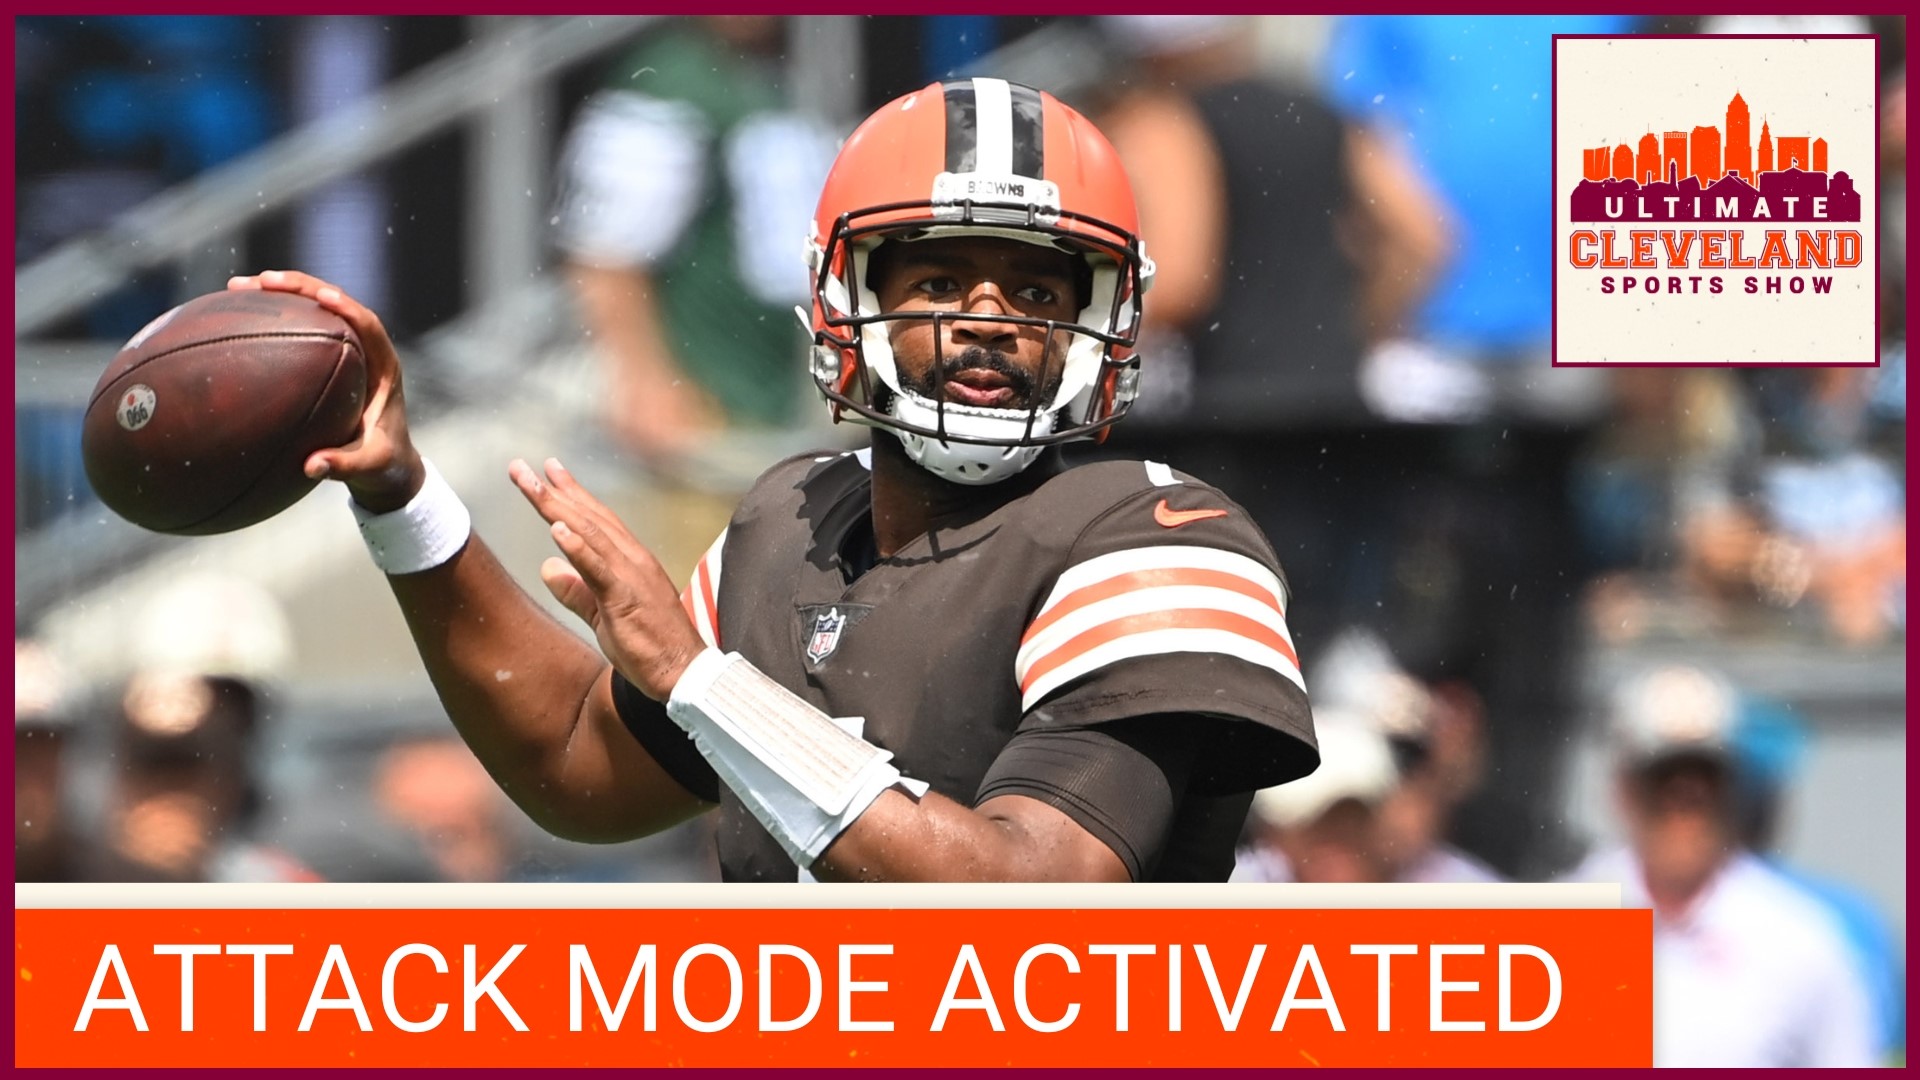 Jacoby Brissett wasn't great in a Week 1 win over the Panthers, but the Cleveland Browns got the win and that's all that matters.